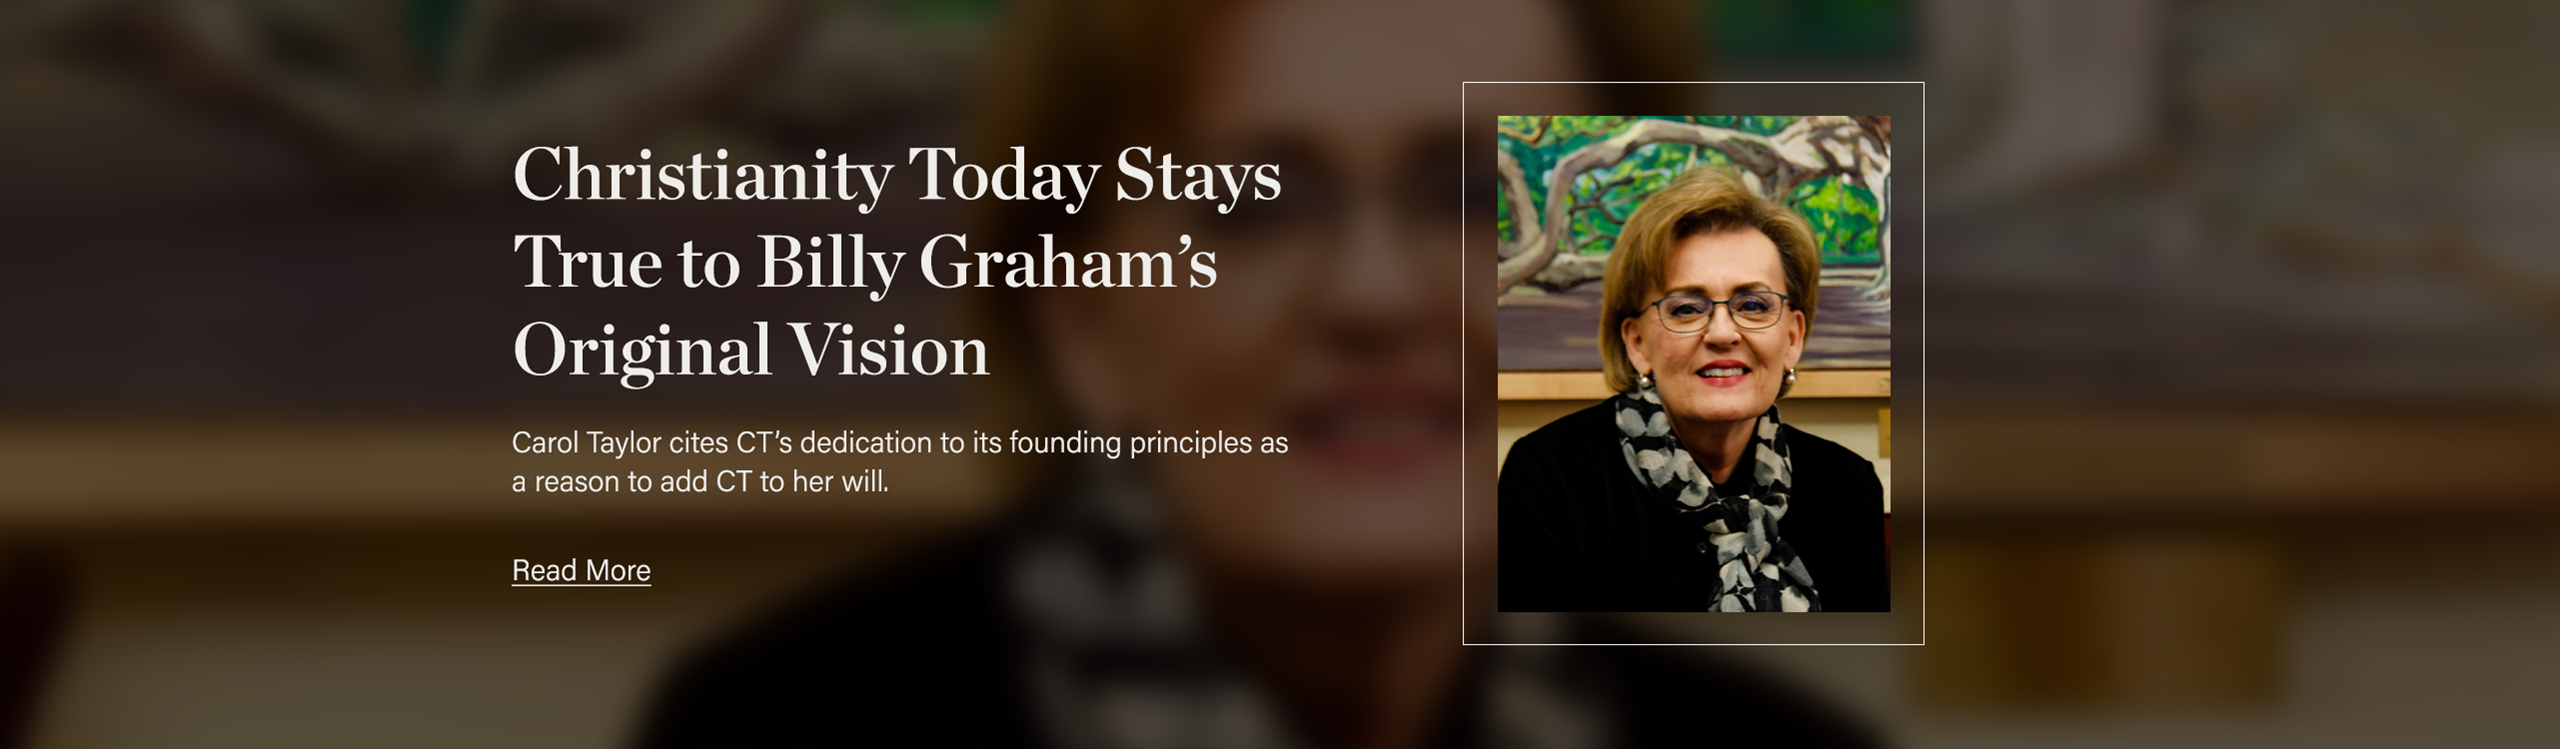 Christianity Today Stays True to Billy Graham’s Original Vision: Carol Taylor cites CT’s dedication to its founding principles as a reason to add CT to her will.